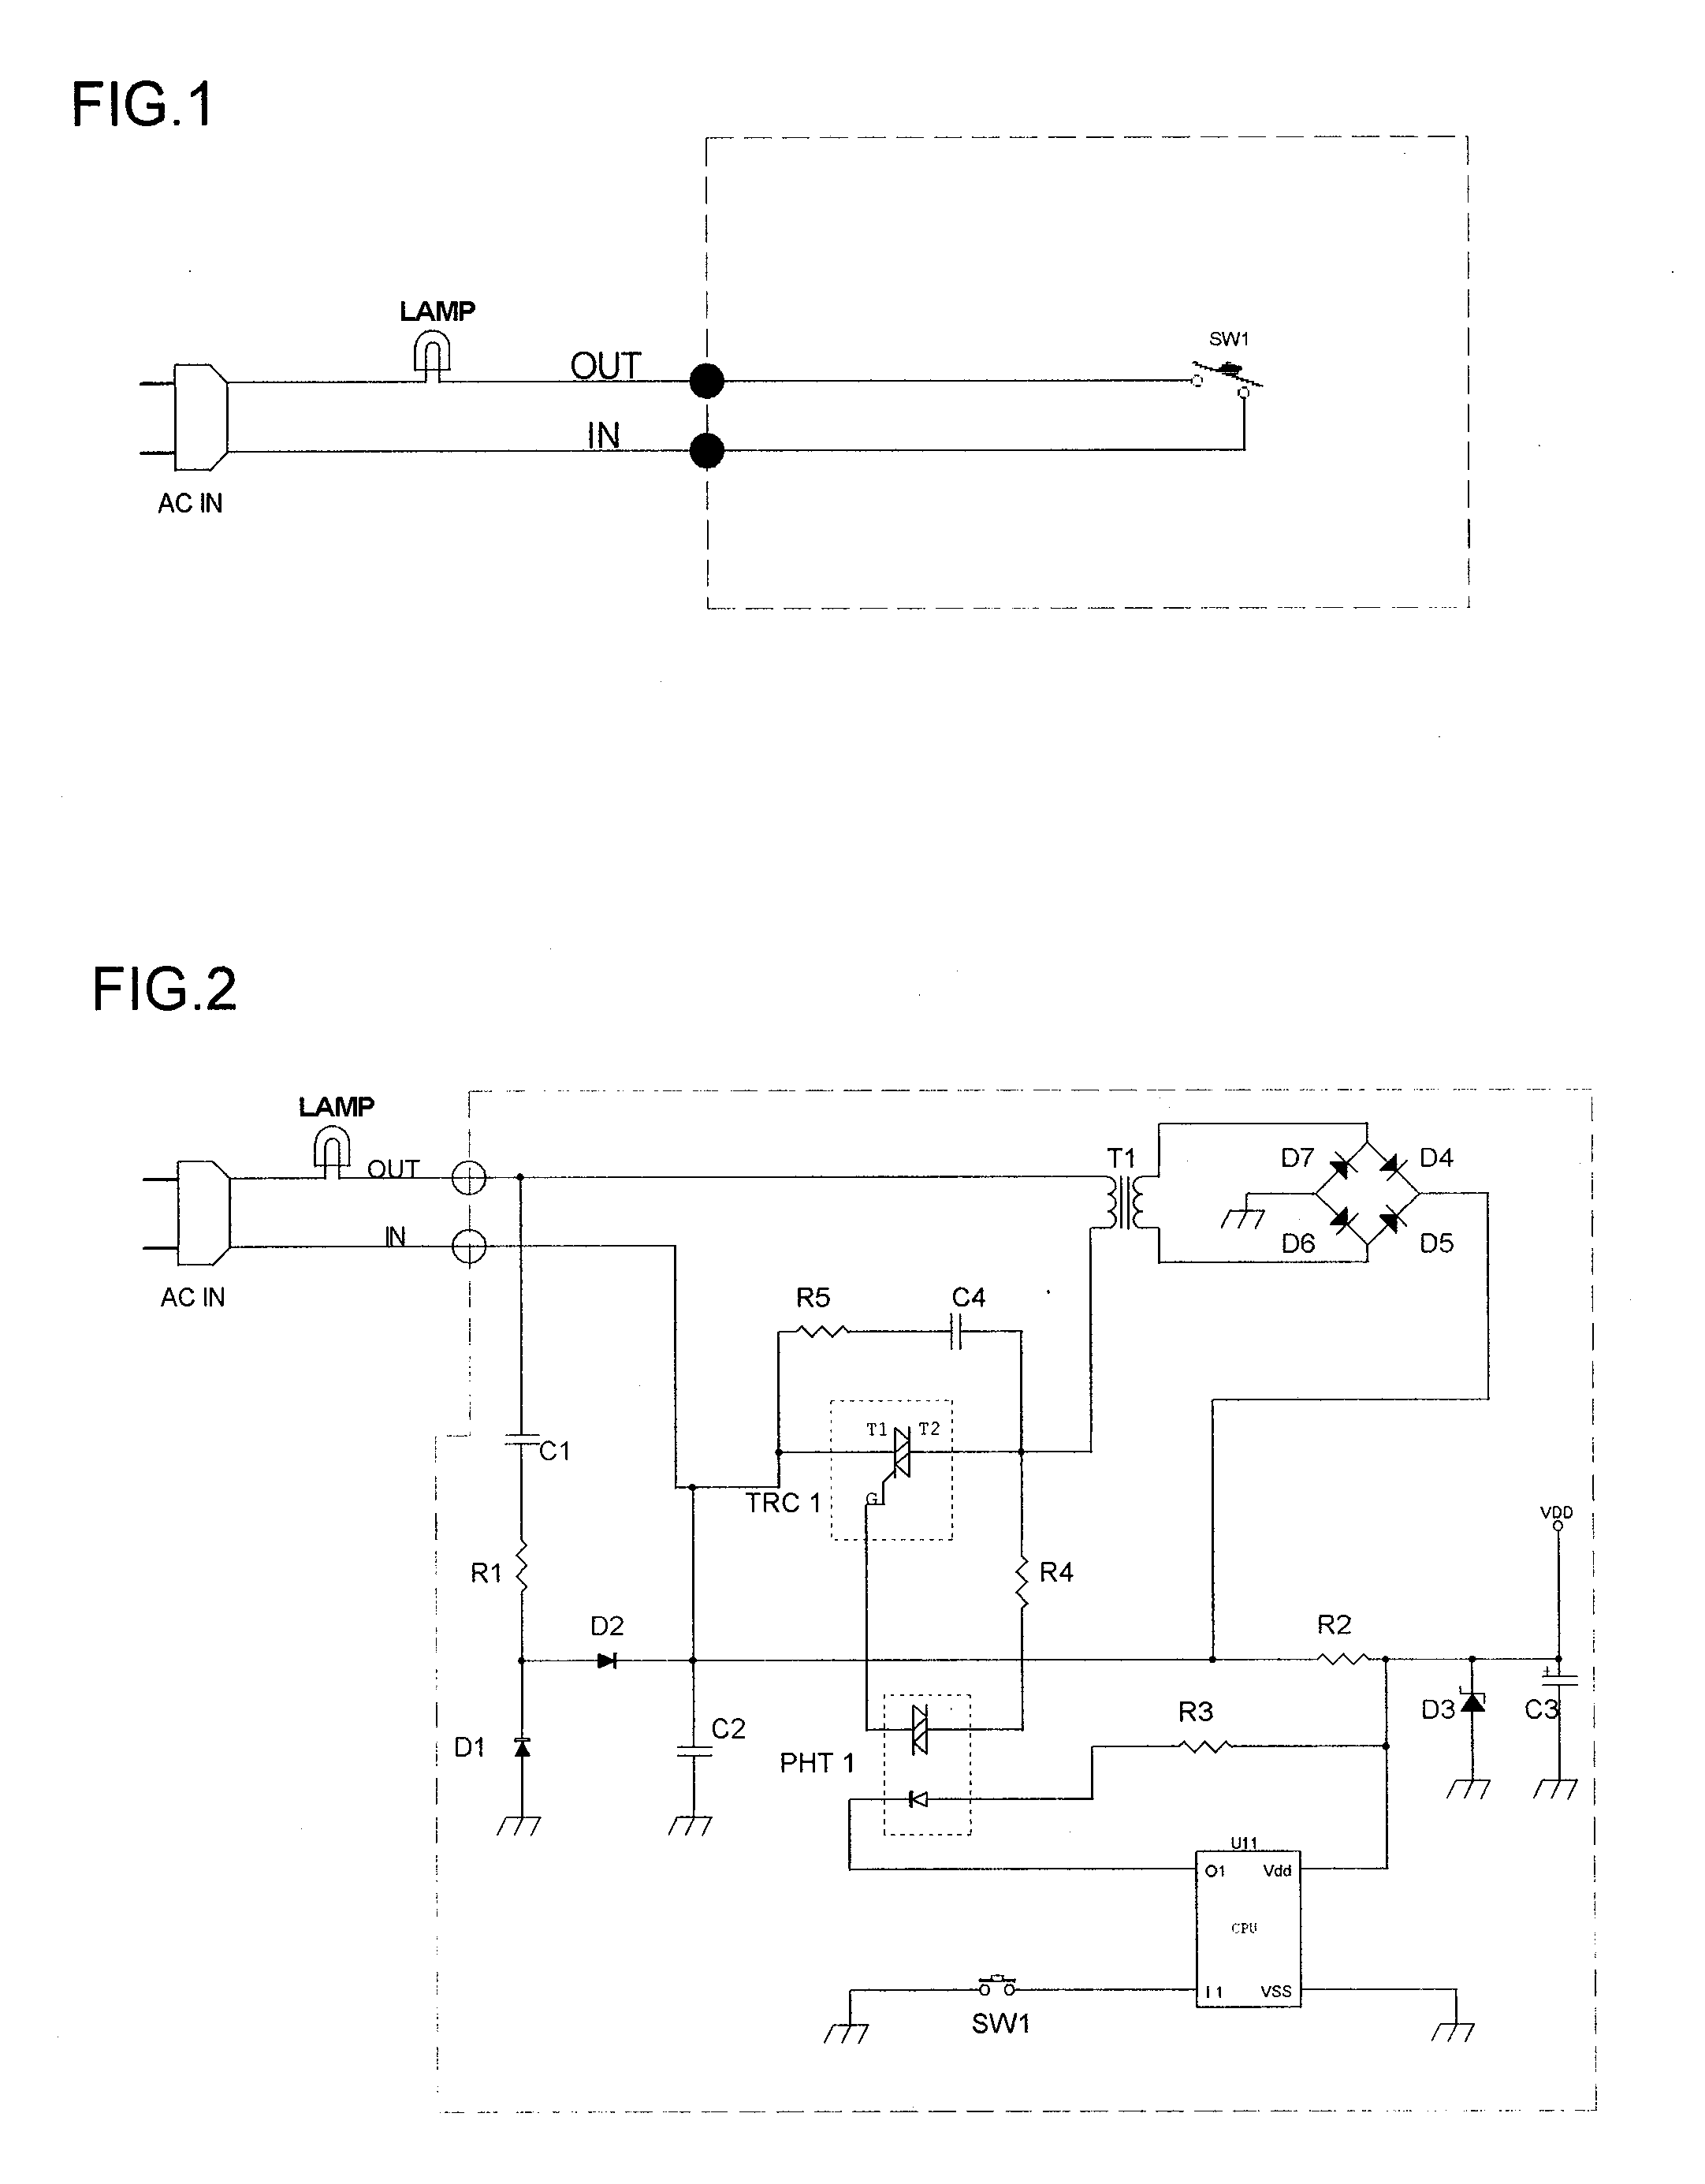 Power supply circuit for the wall mounted electronic switch